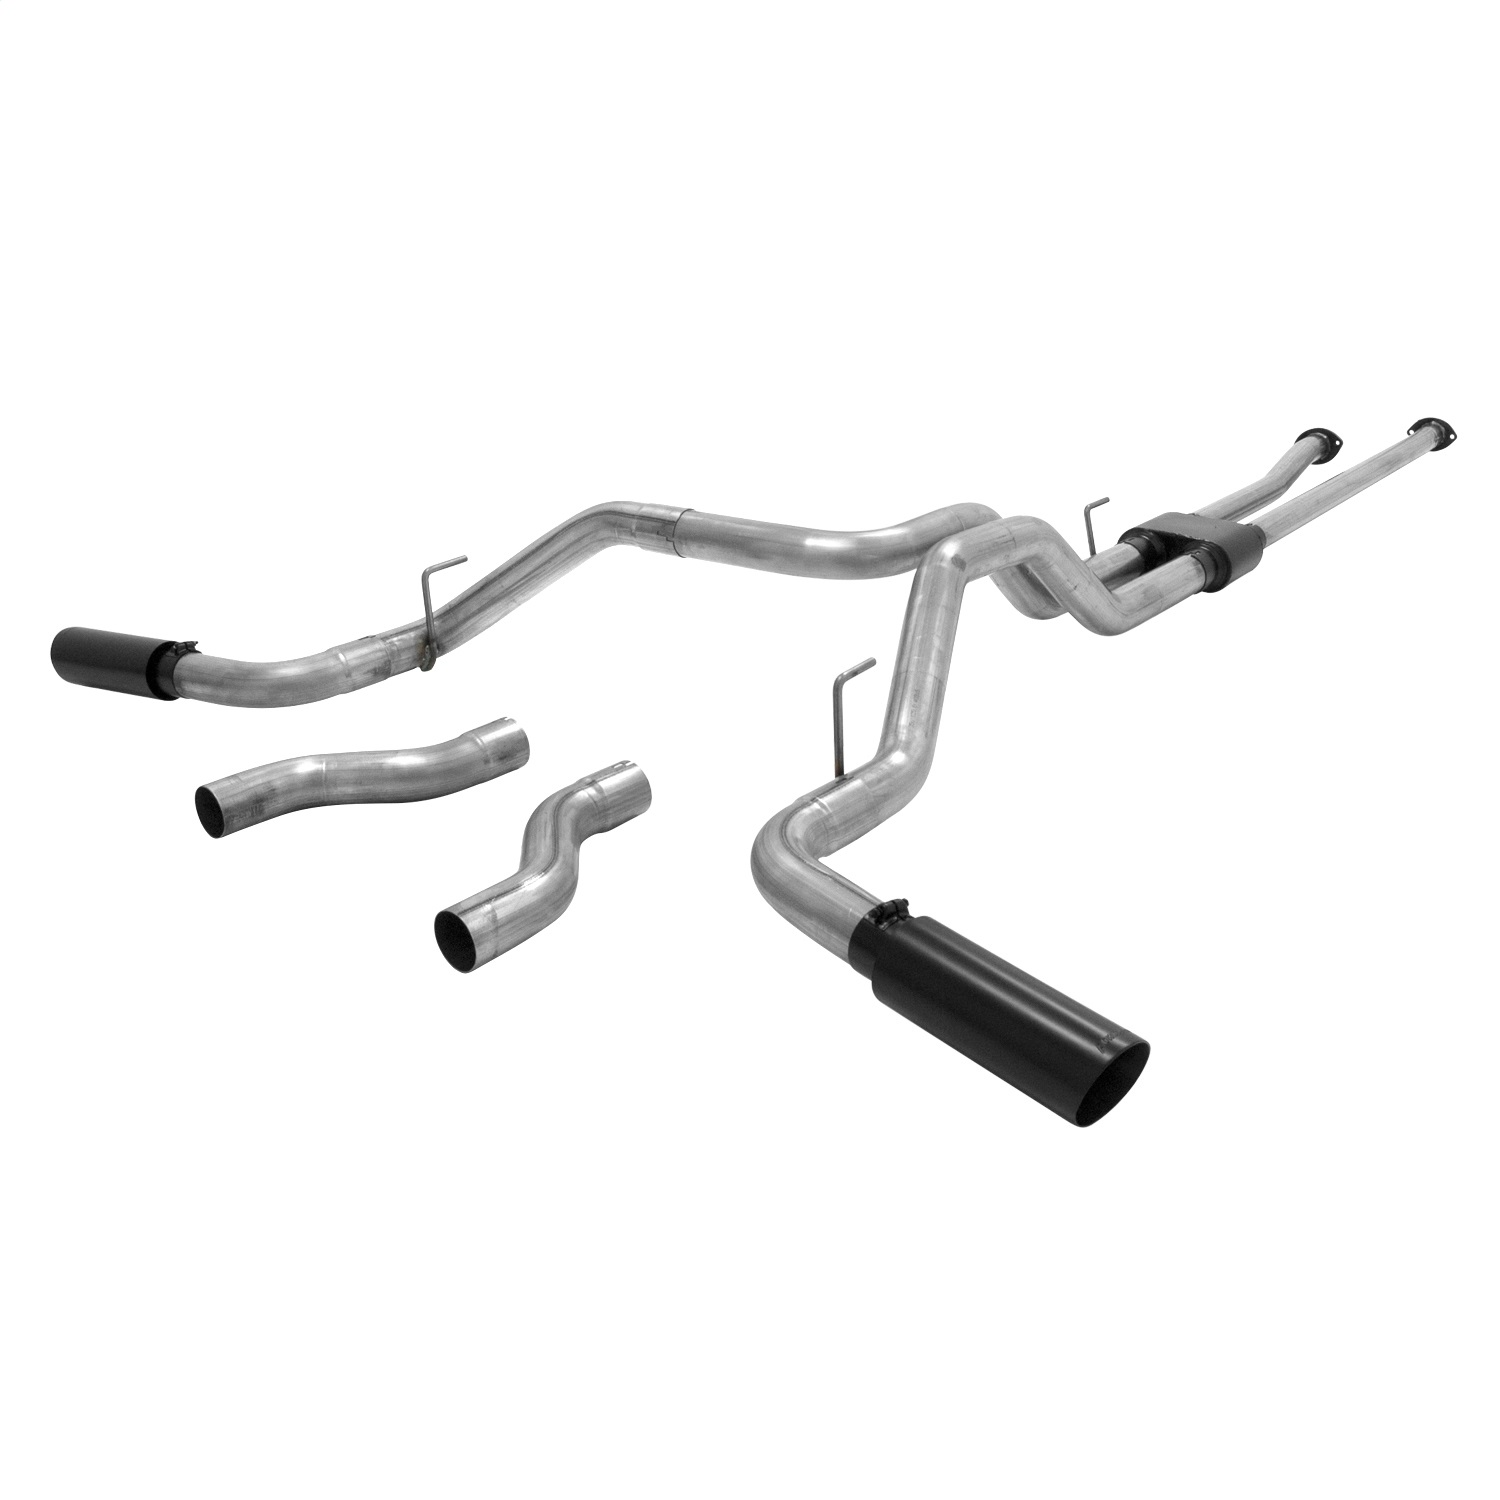 Flowmaster Flowmaster 817692 Outlaw Series Cat Back Exhaust System Fits 09-15 Tundra